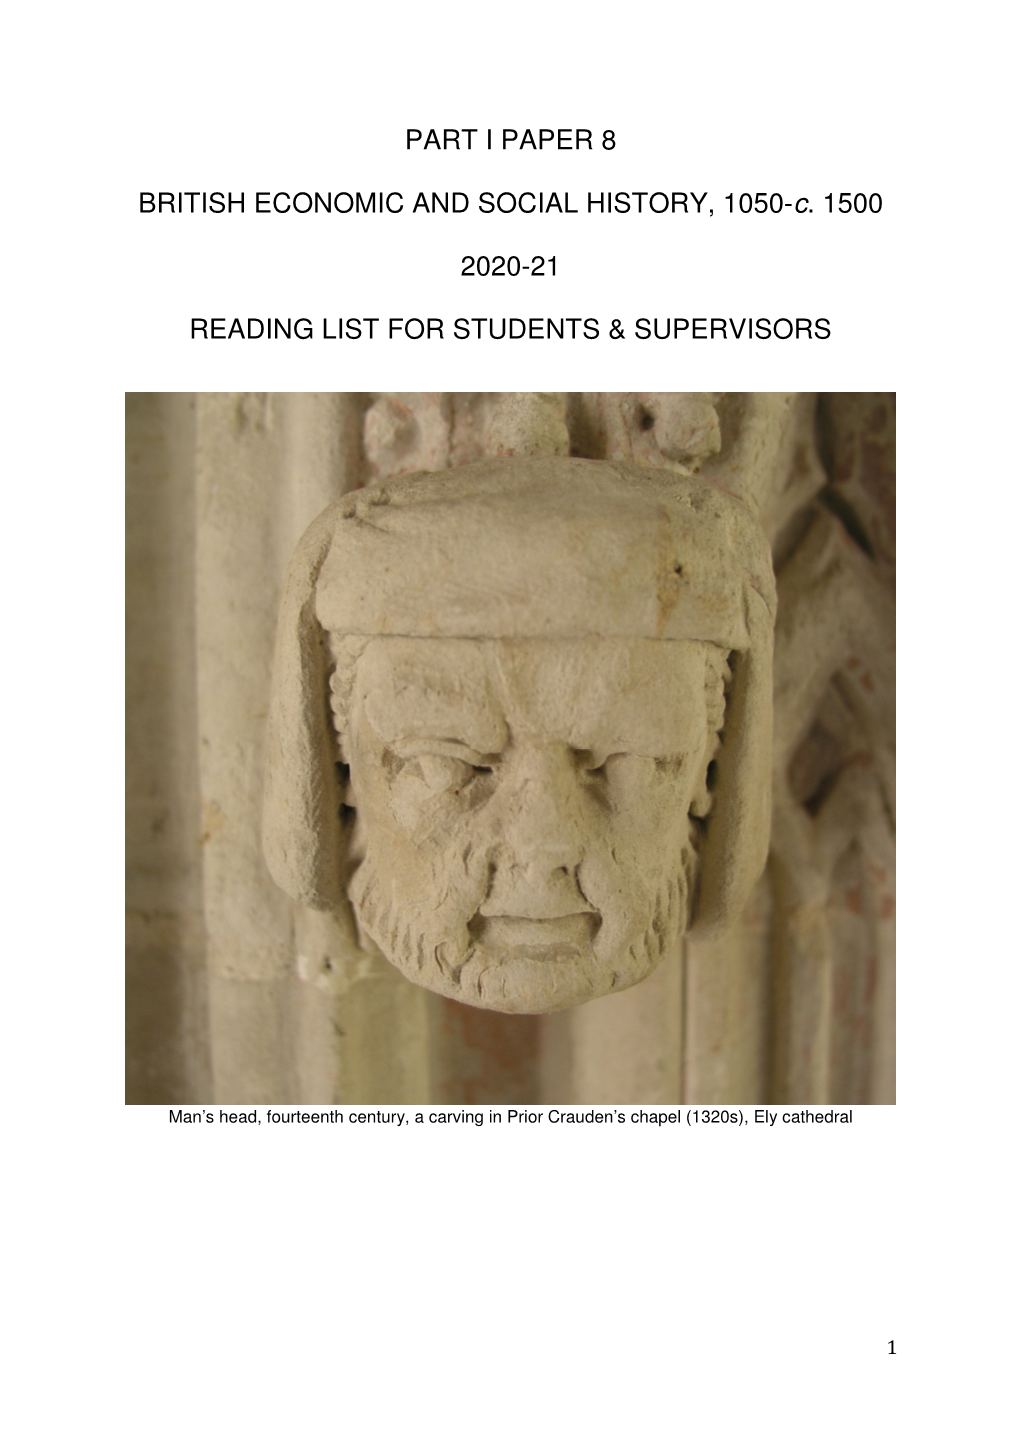 PART I PAPER 8 BRITISH ECONOMIC and SOCIAL HISTORY, 1050-C. 1500 2020-21 READING LIST for STUDENTS & SUPERVISORS